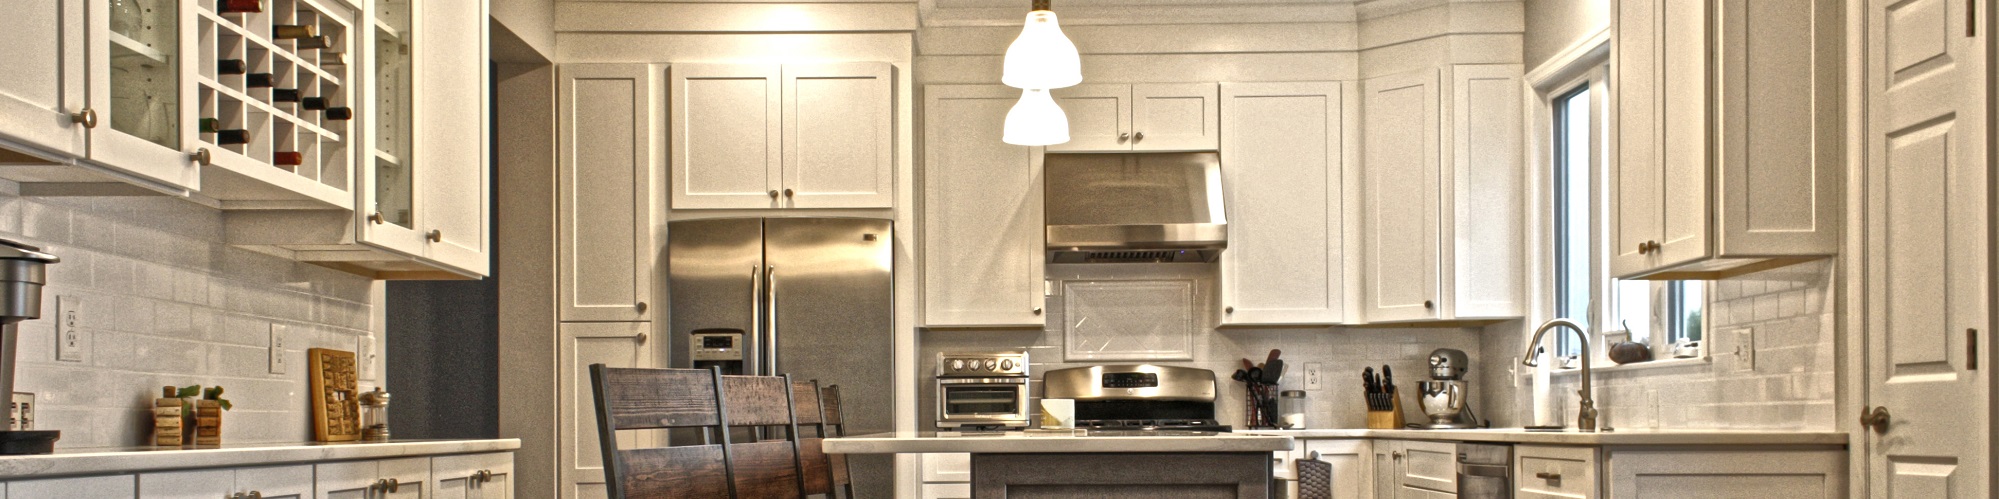 Kitchen with white cabinets from amiano and son